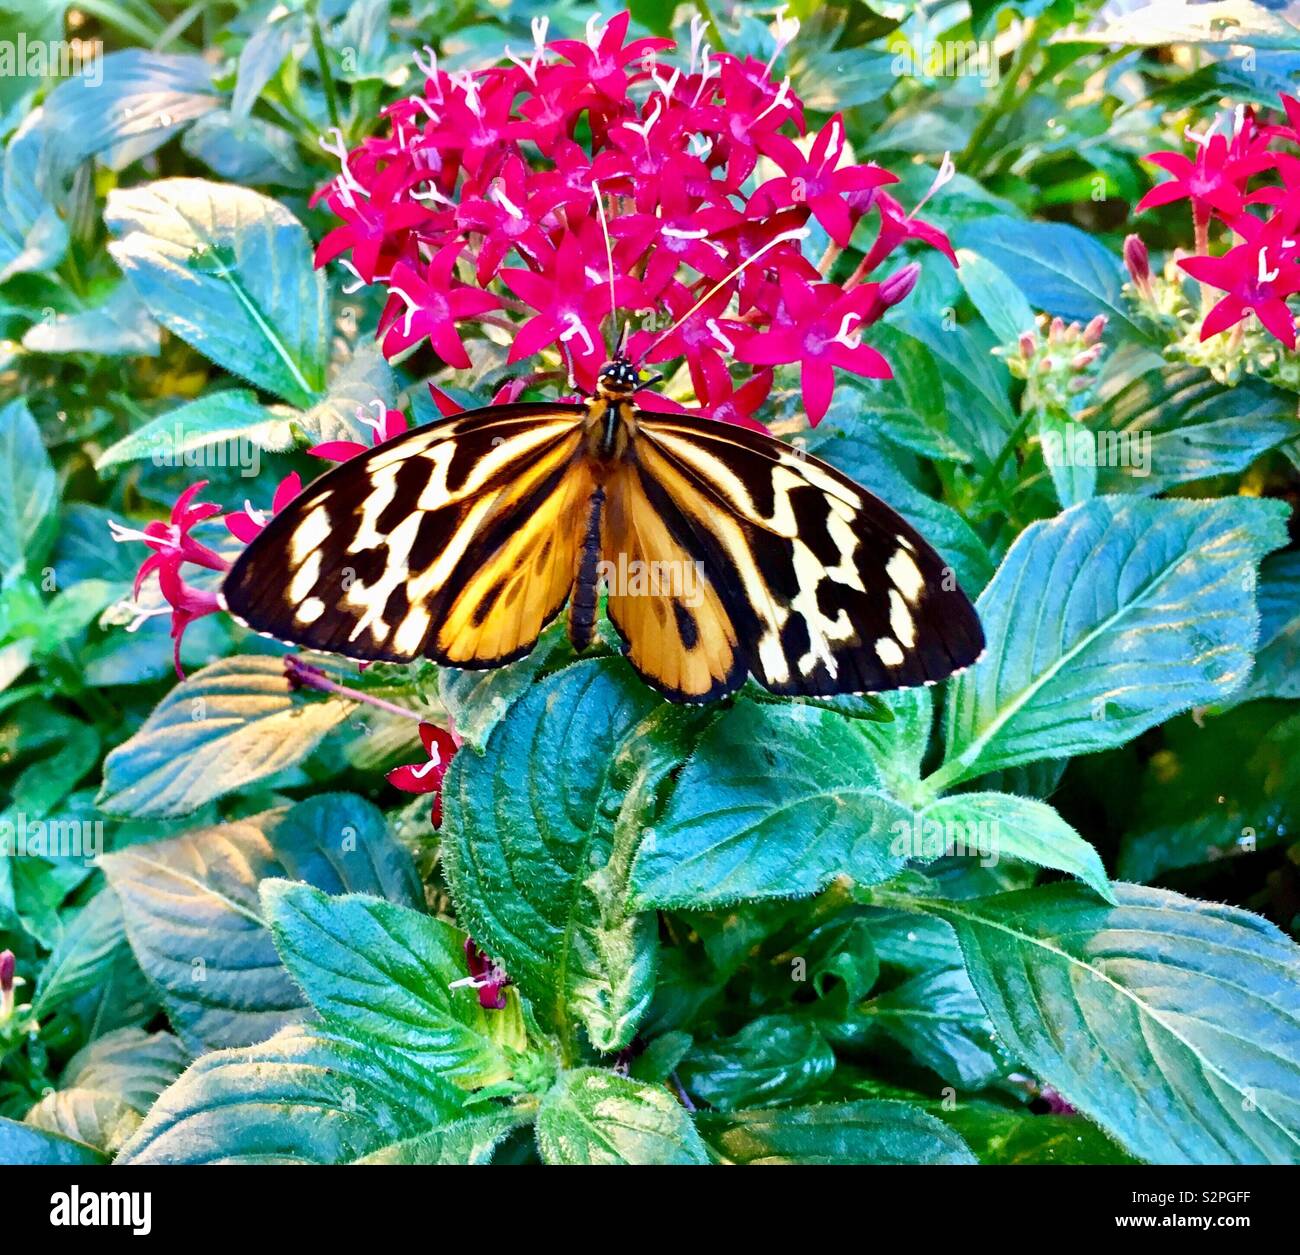 Orange white and black butterfly perched on red star flowers surrounded by green leaves Stock Photo